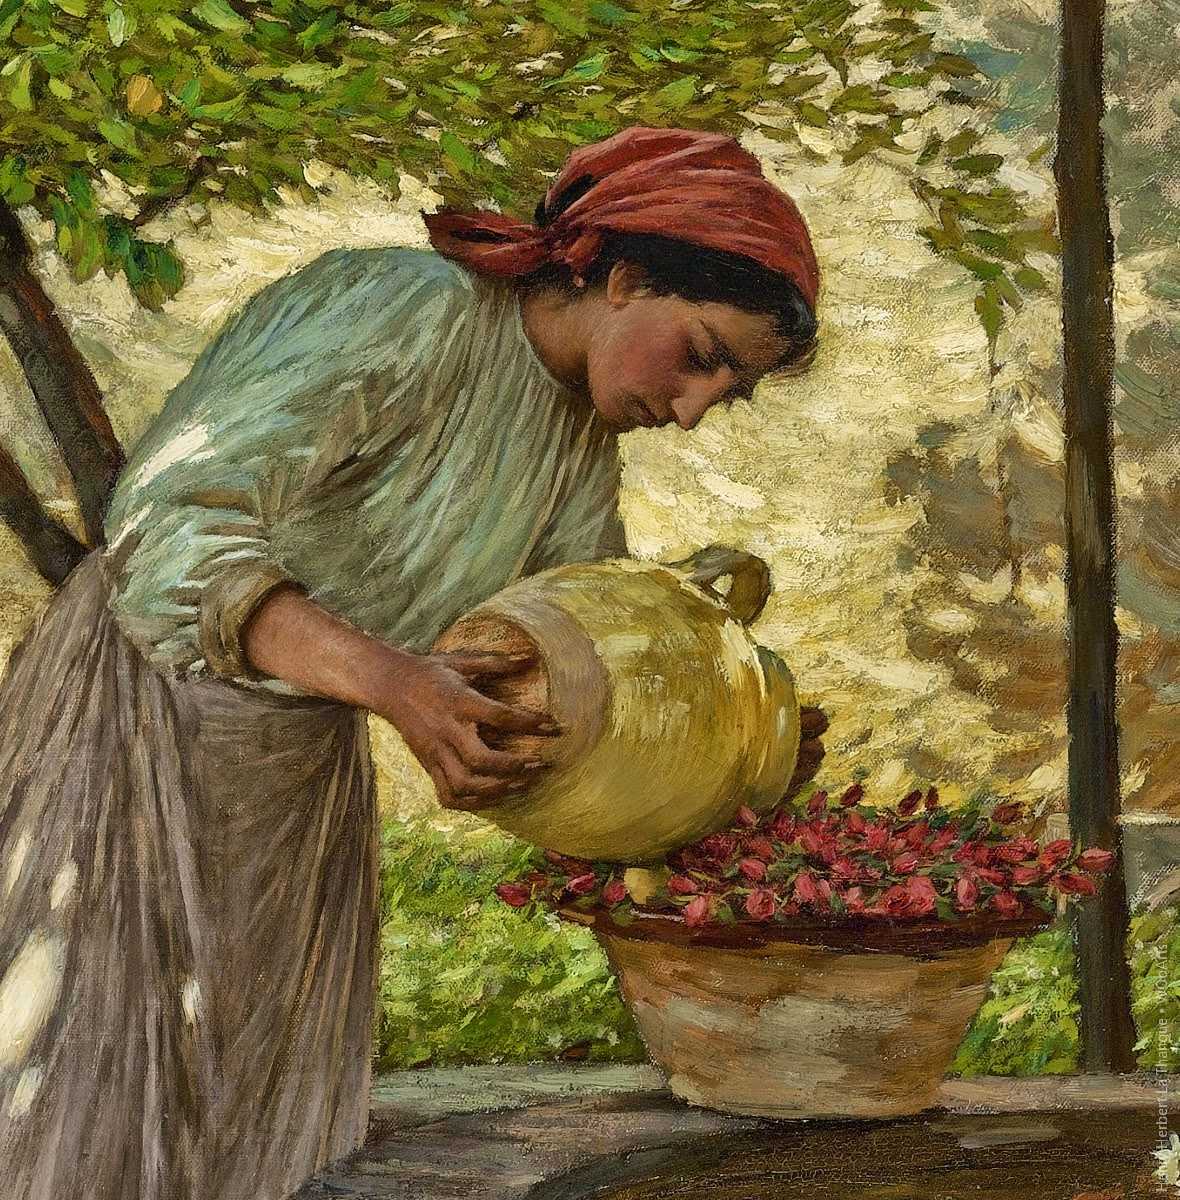 Painting by Henry Herbert La Thangue